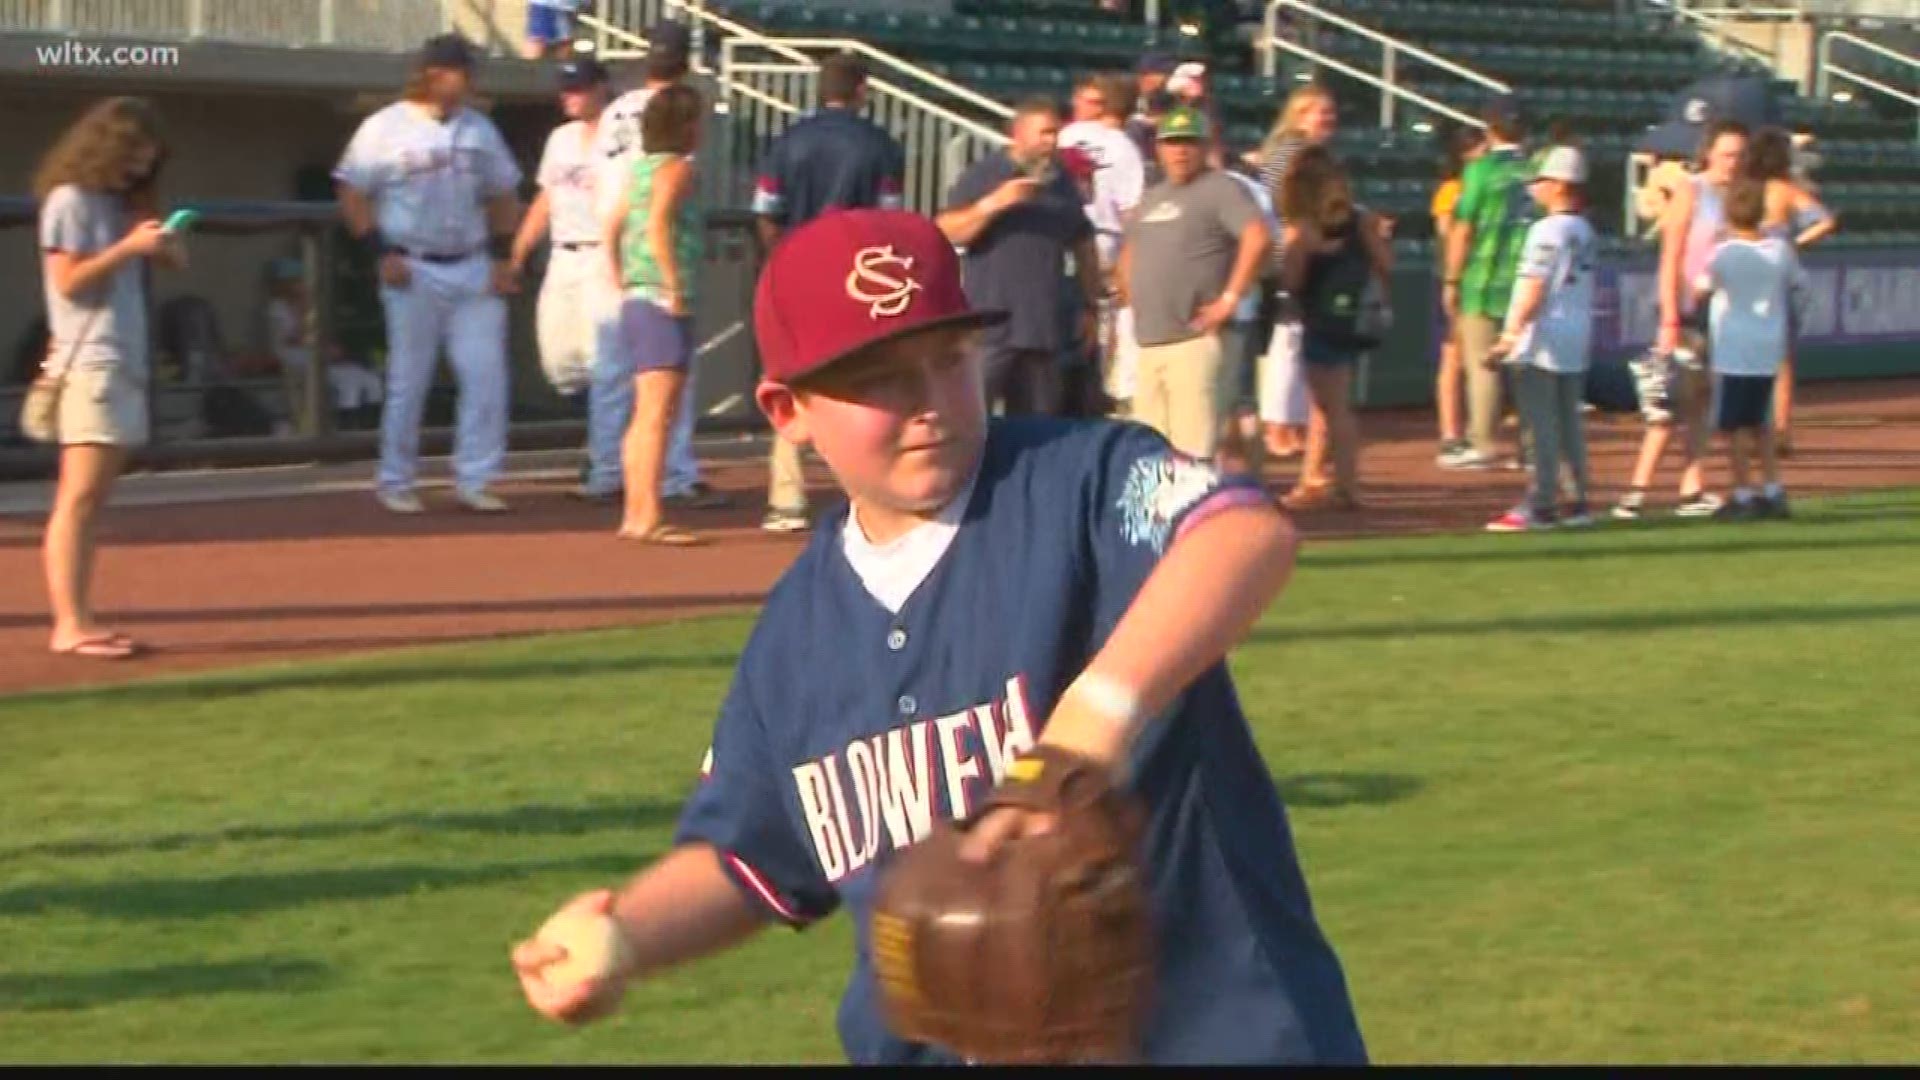 12-year-old Brayden Sox has been winning his battle with leukemina and Thursday night, he enjoyed a special night courtesy of the Blowfish and the Make-A-Wish Foundation.